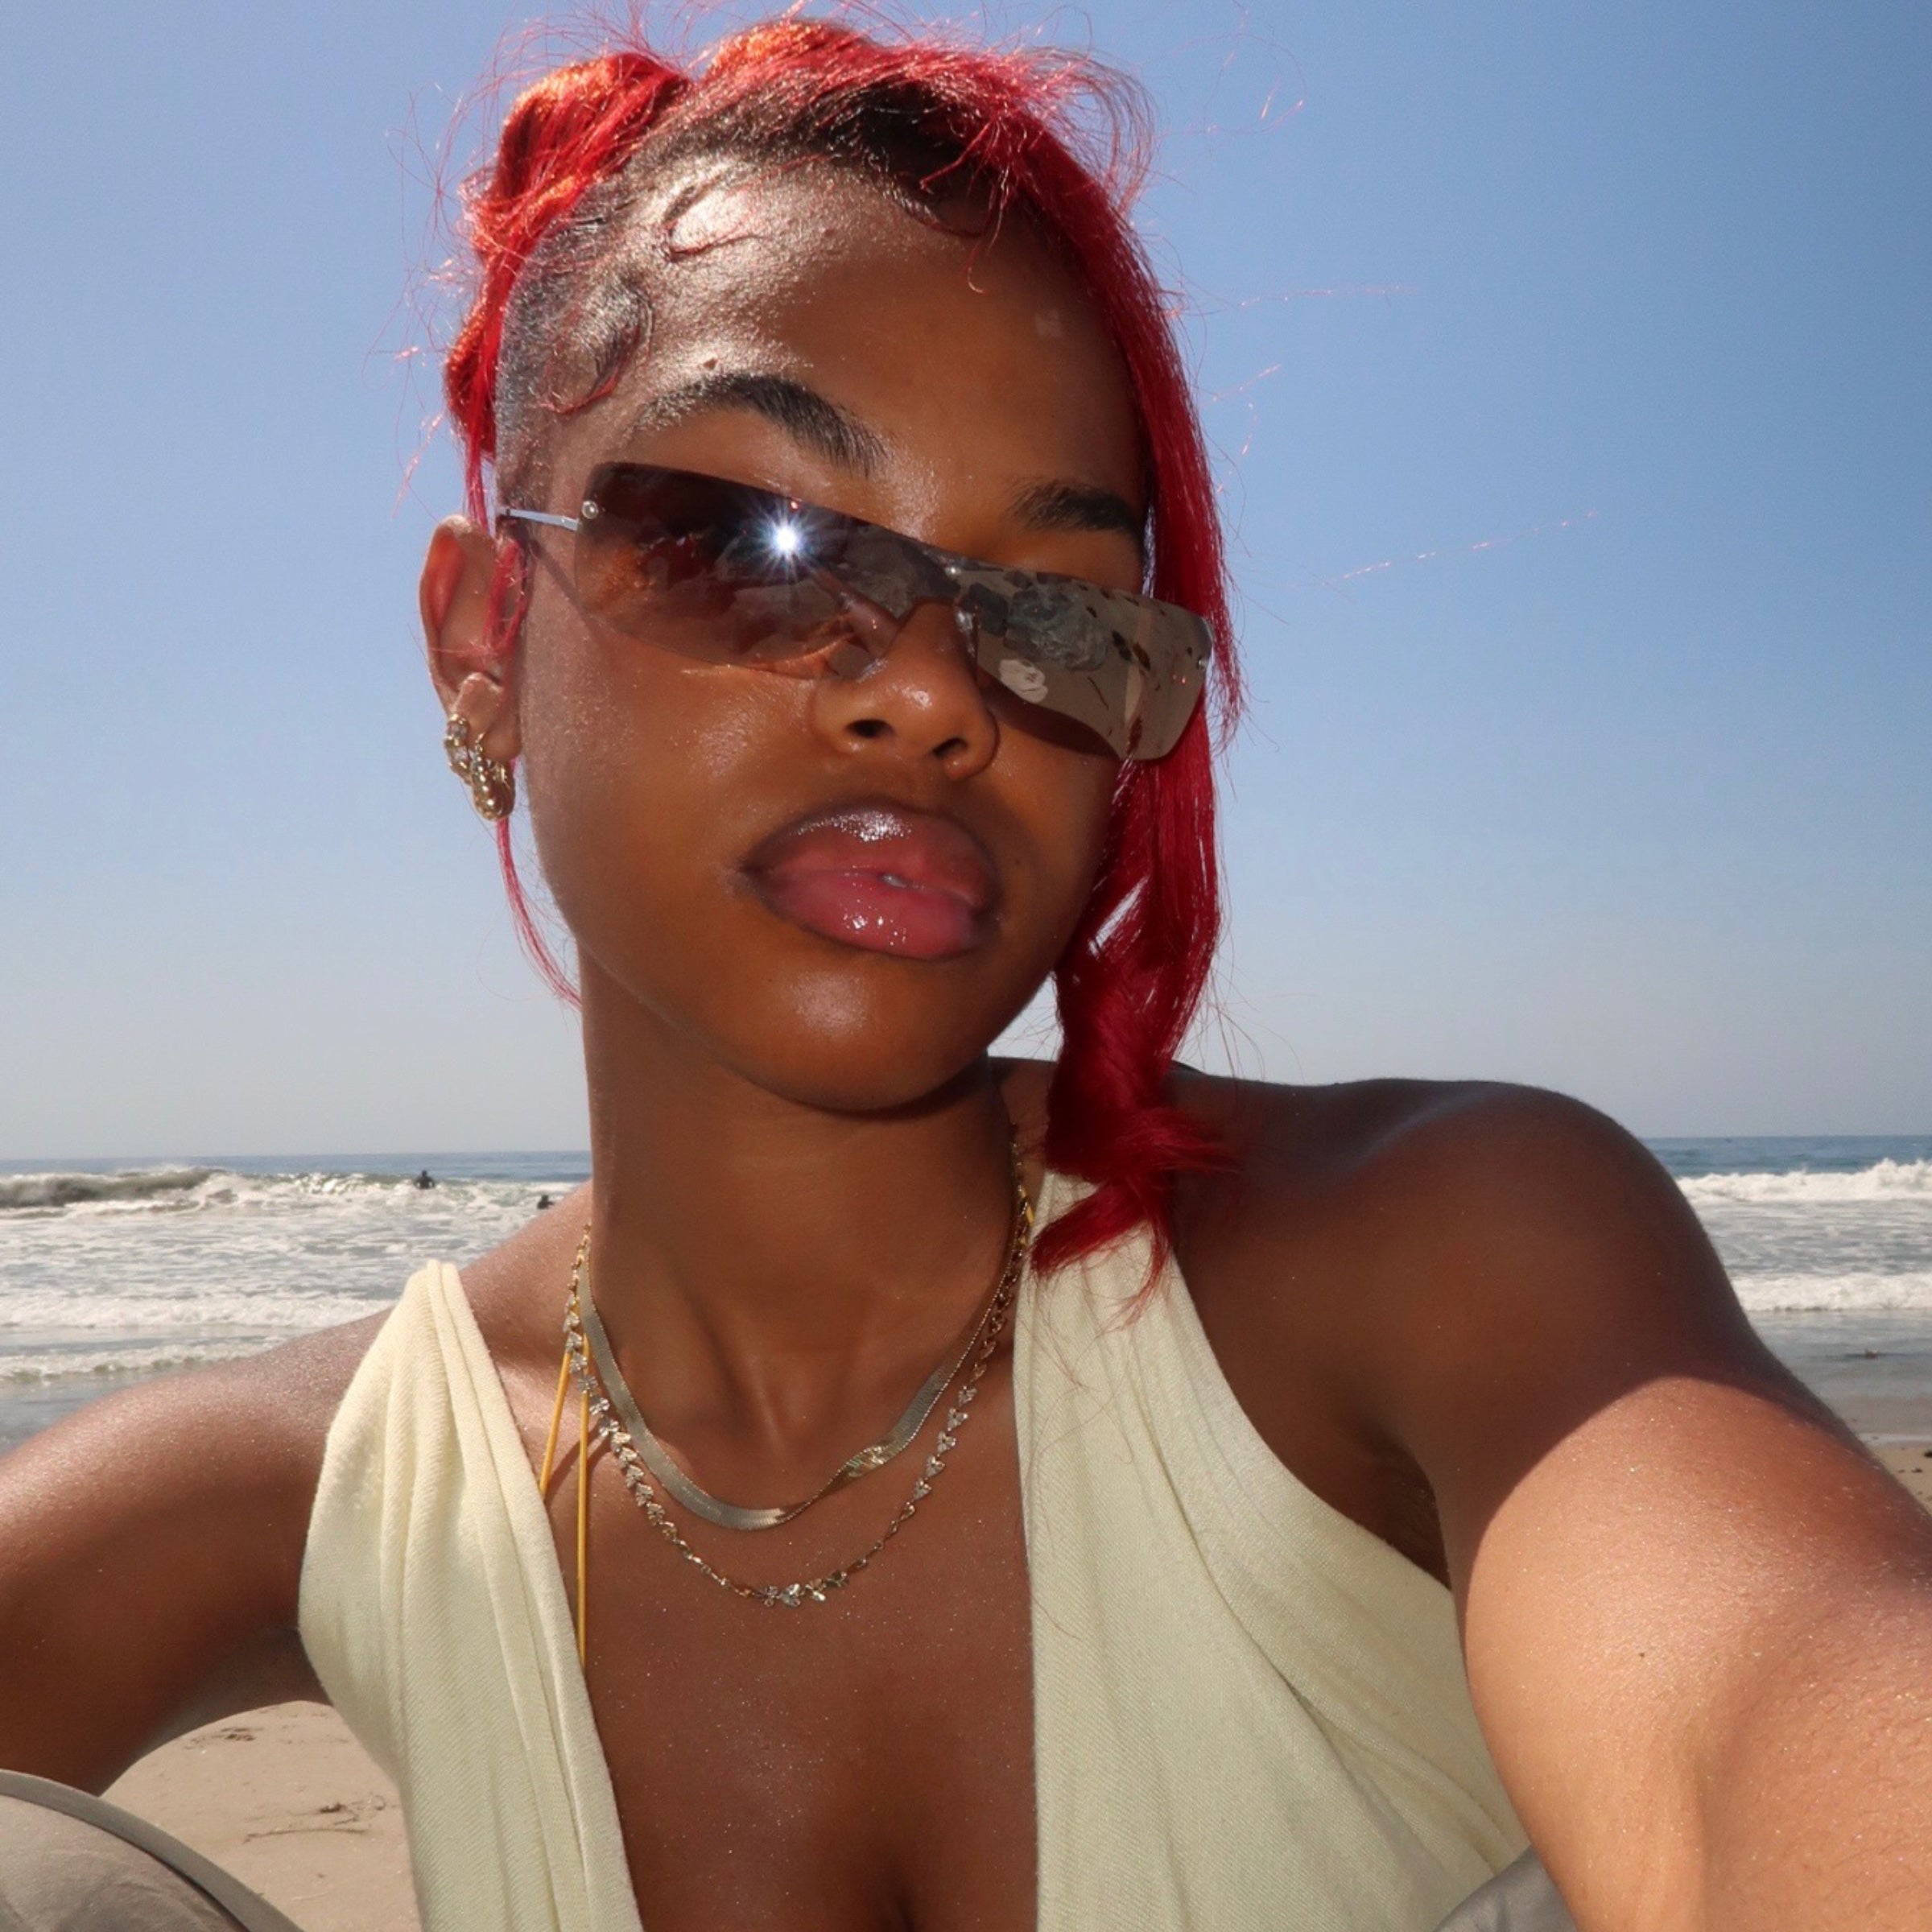 model on a beach wearing style called California girl, a rimless shield